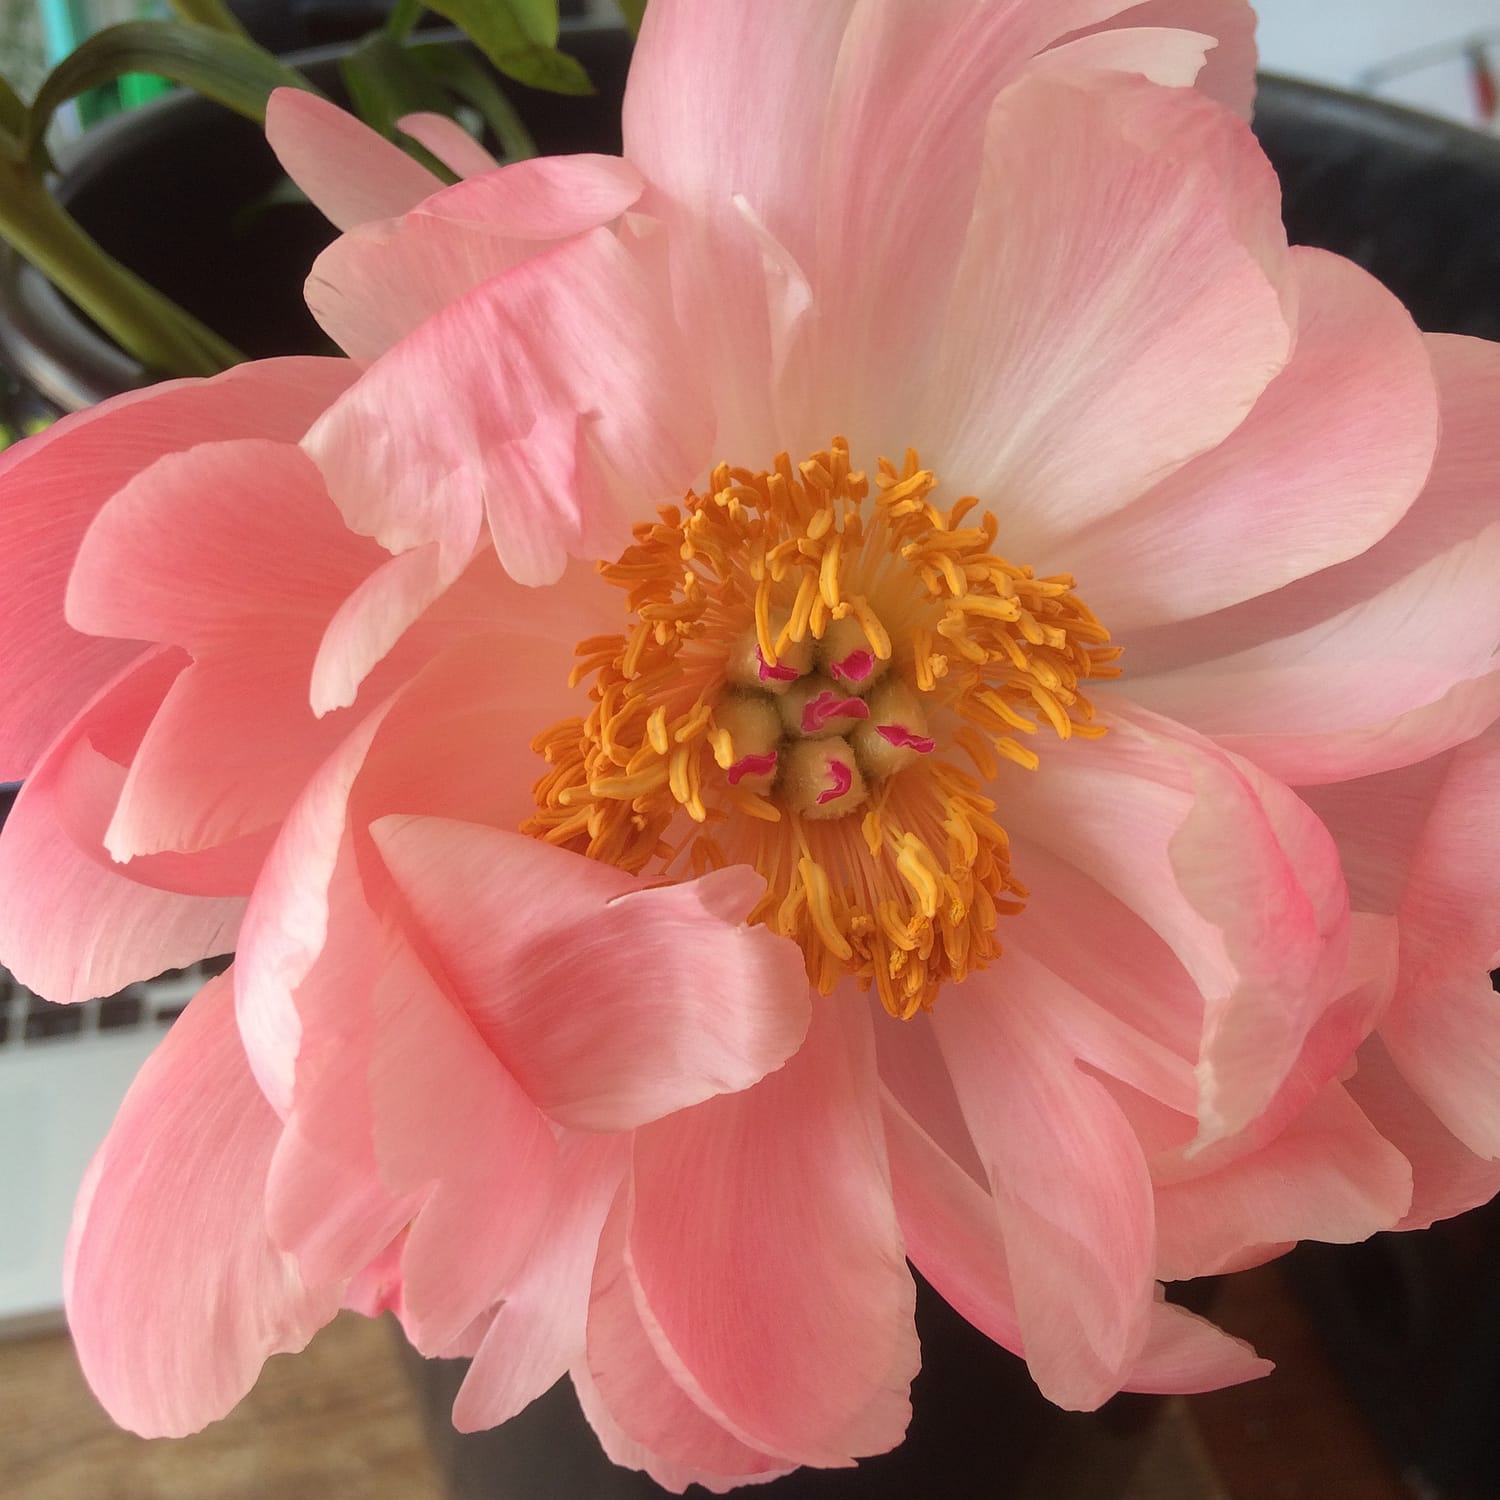 coral peonies turning into lighter pink shade